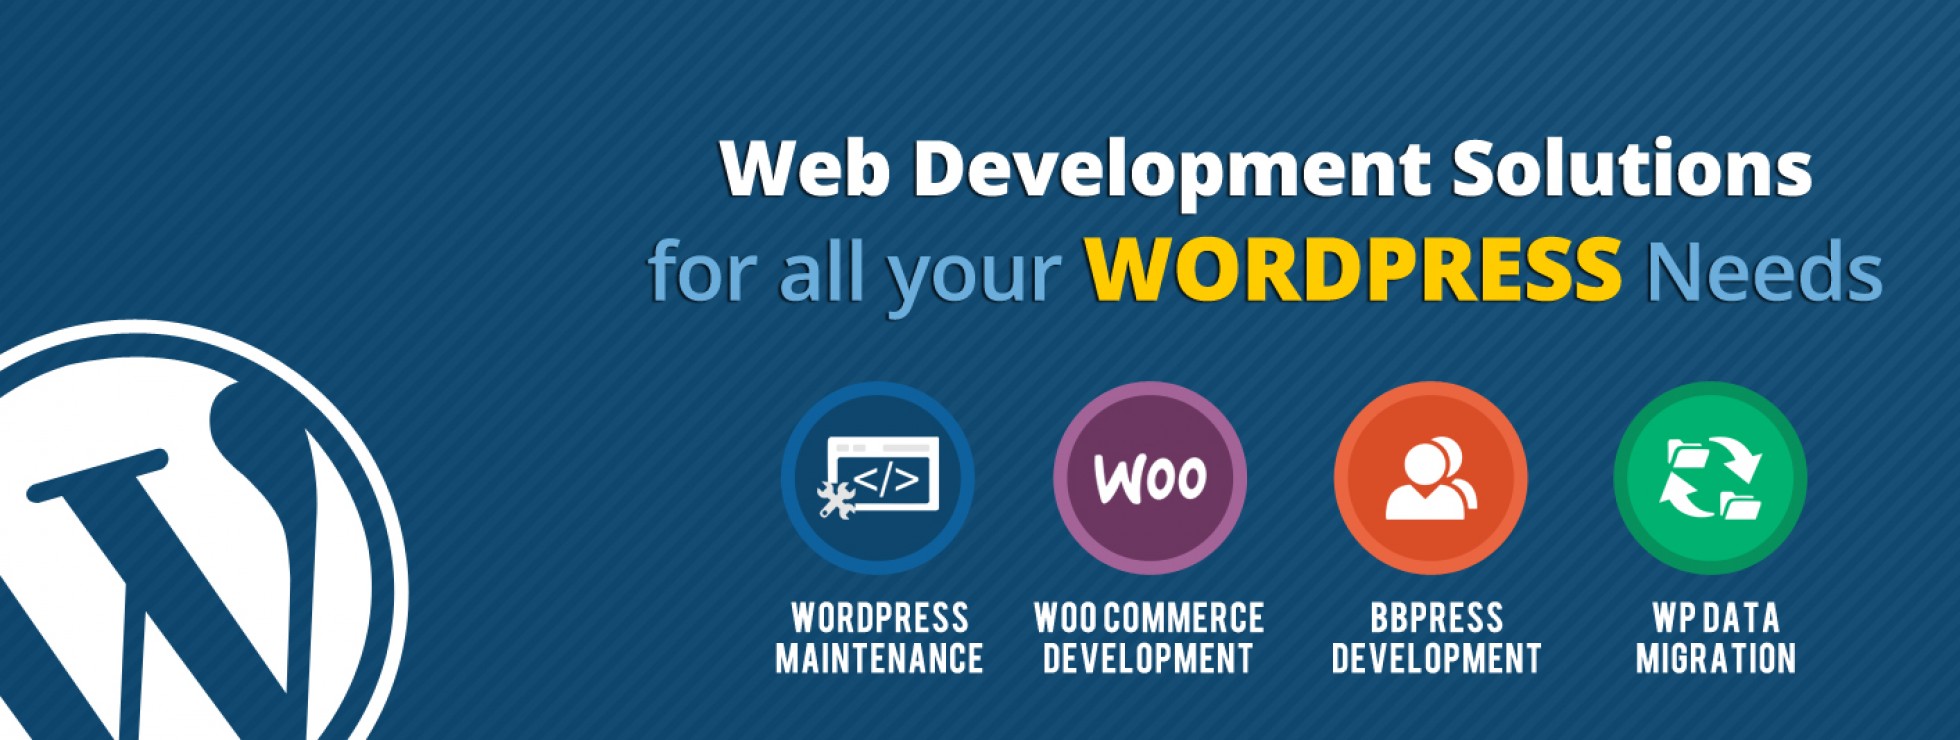 Website Designing is the Basic Requirement For Every Business